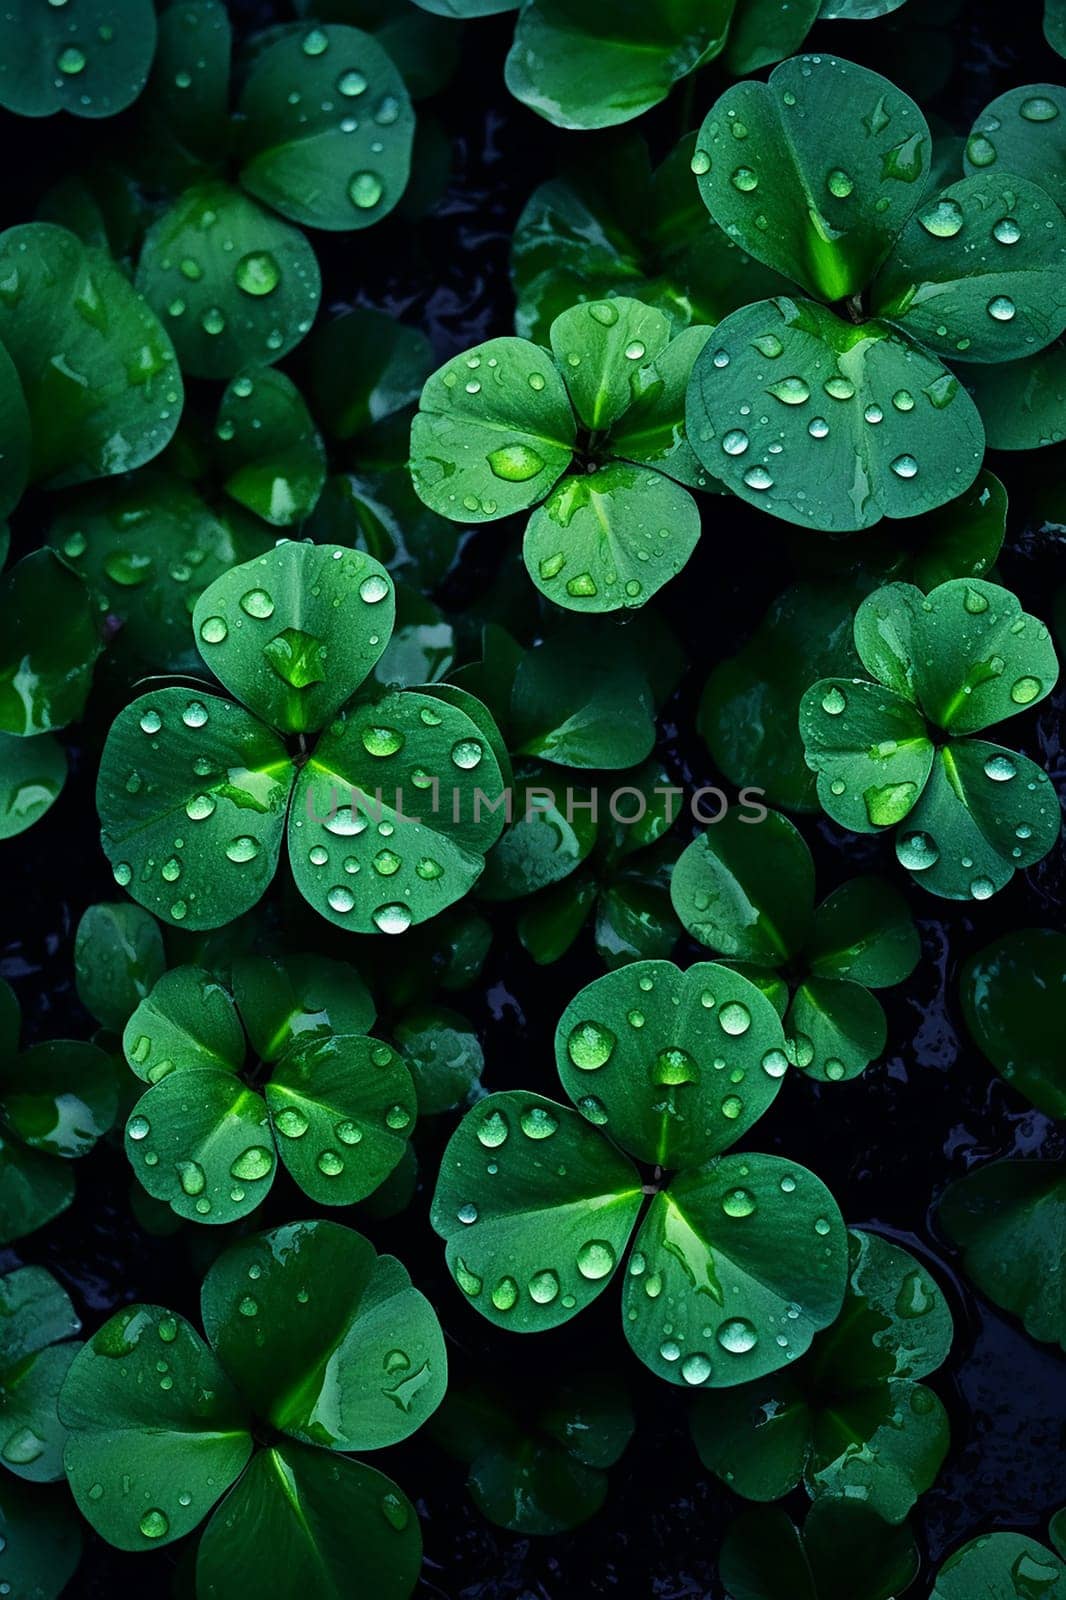 Fresh clovers with dew drops on a dark background. by Hype2art